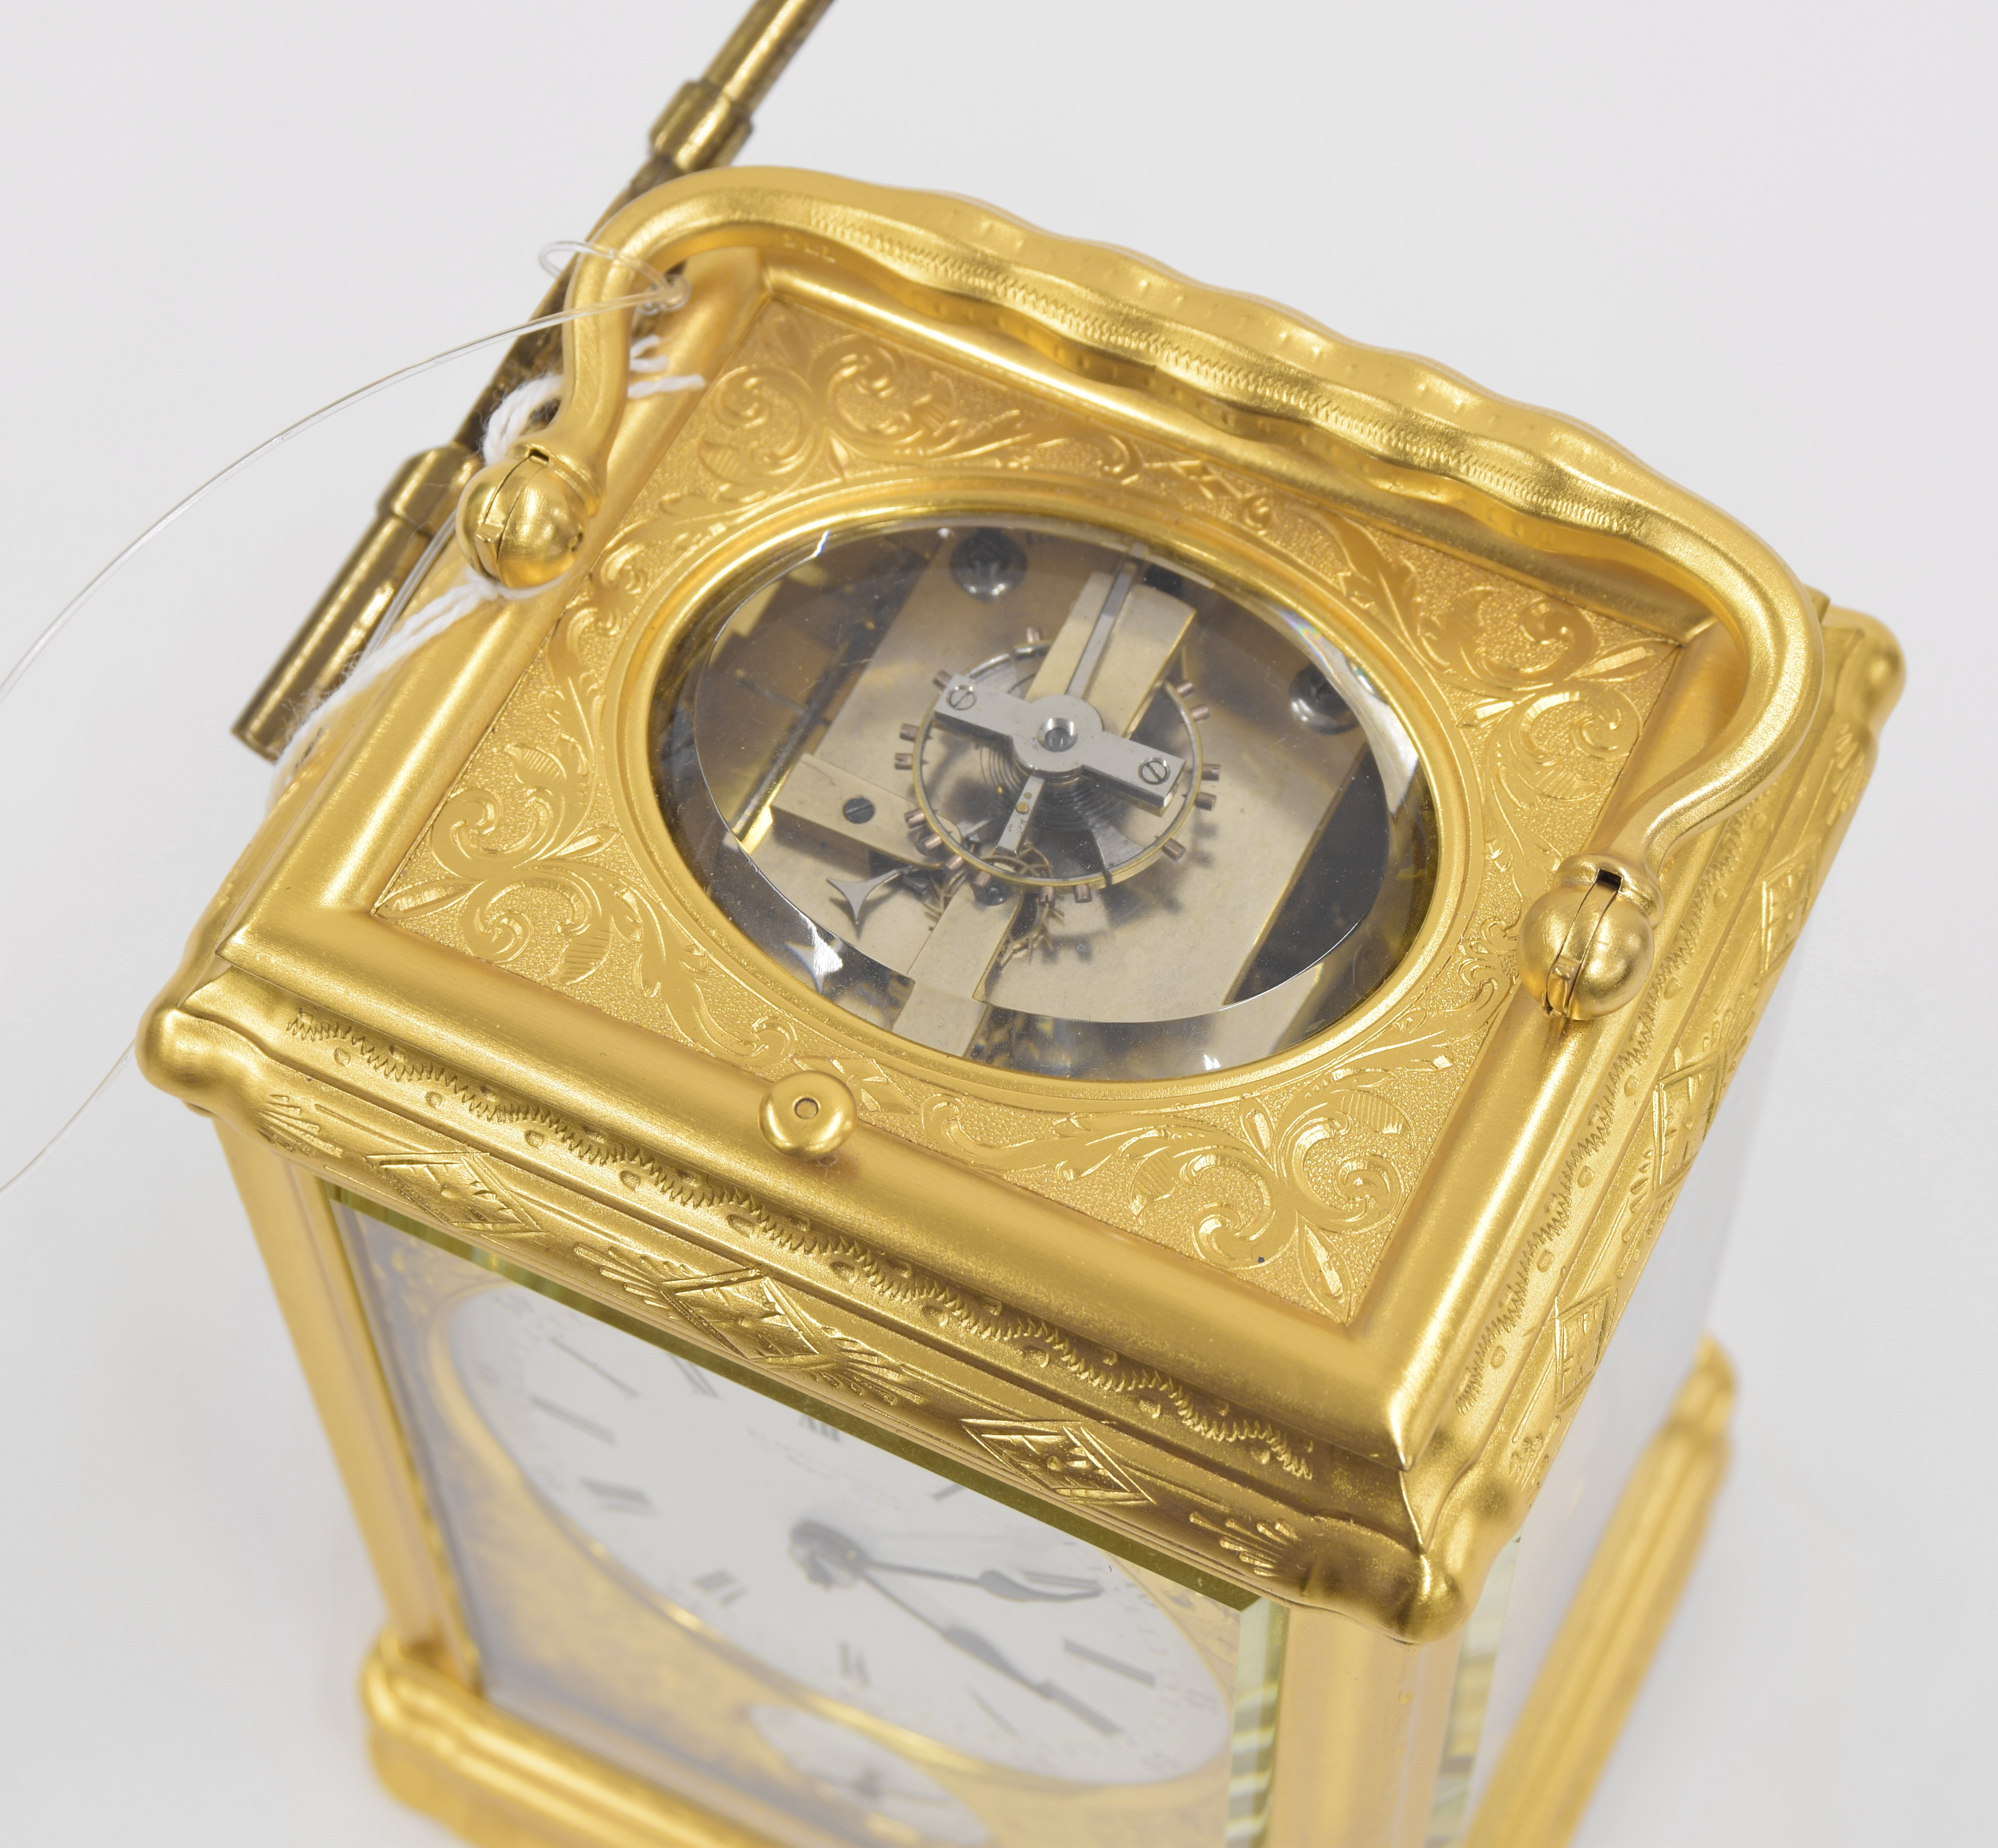 Fine Grande Sonnerie repeater carriage clock with alarm, the movement back plate stamped - Image 5 of 5